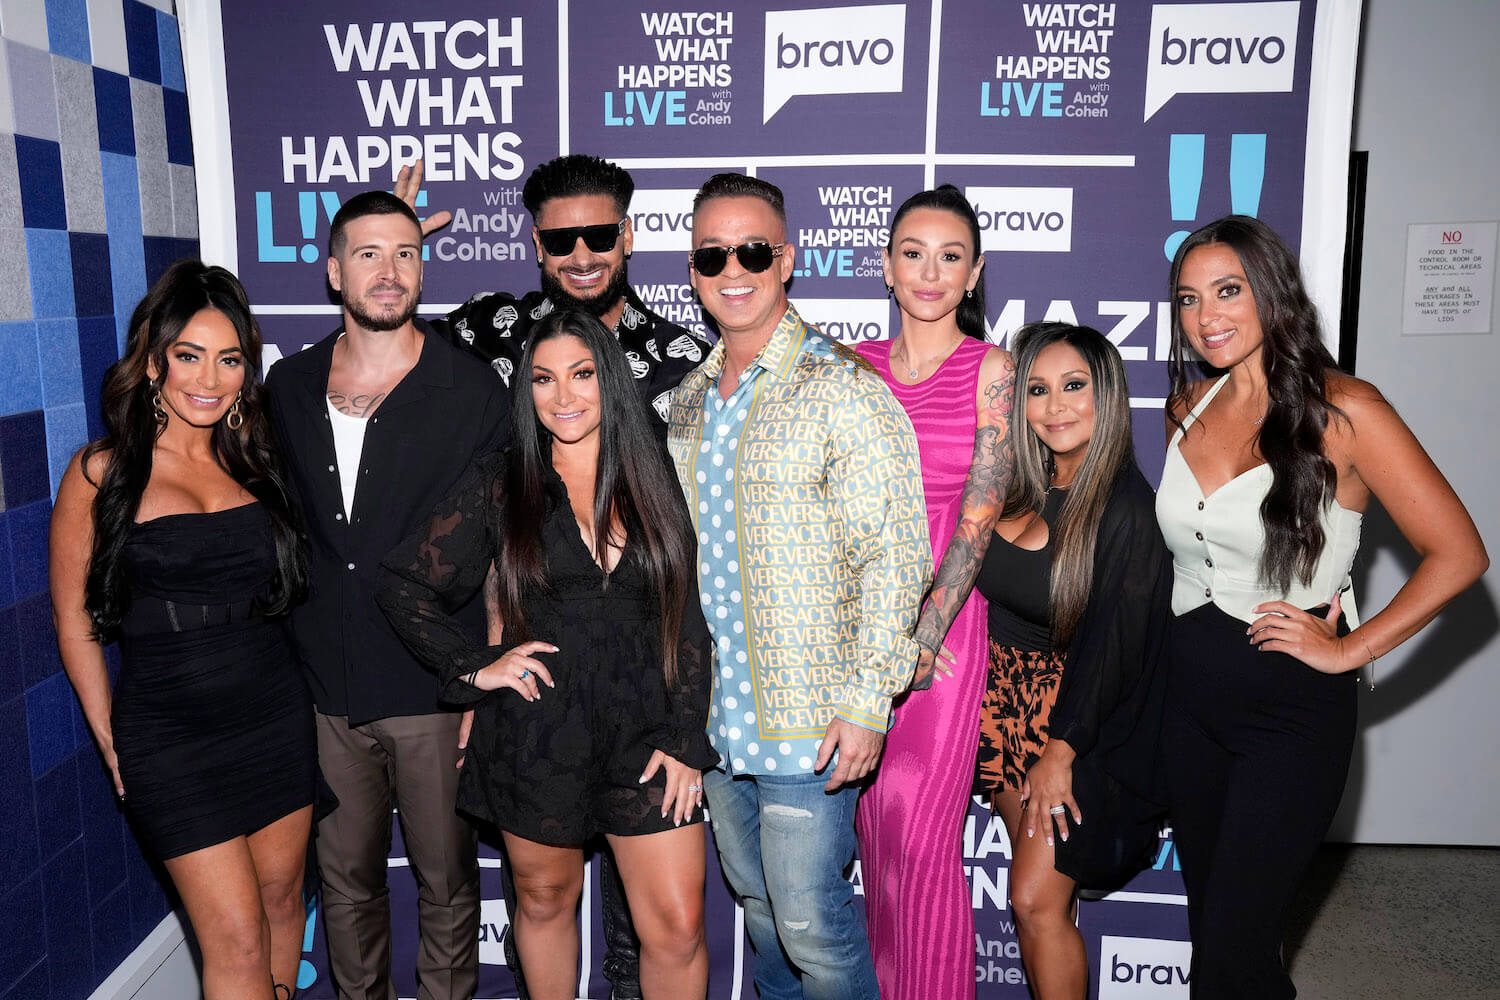 'Jersey Shore: Family Vacation' stars Angelina Pivarnick, Vinny Guadagnino, Deena Nicole Cortese, Paul 'DJ Pauly D' Delvecchio, Mike 'The Situation' Sorrentino, Jenni 'JWOWW' Farley, Nicole 'Snooki' Polizzi, and Sammi 'Sweetheart' Giancola standing next to each other and smiling